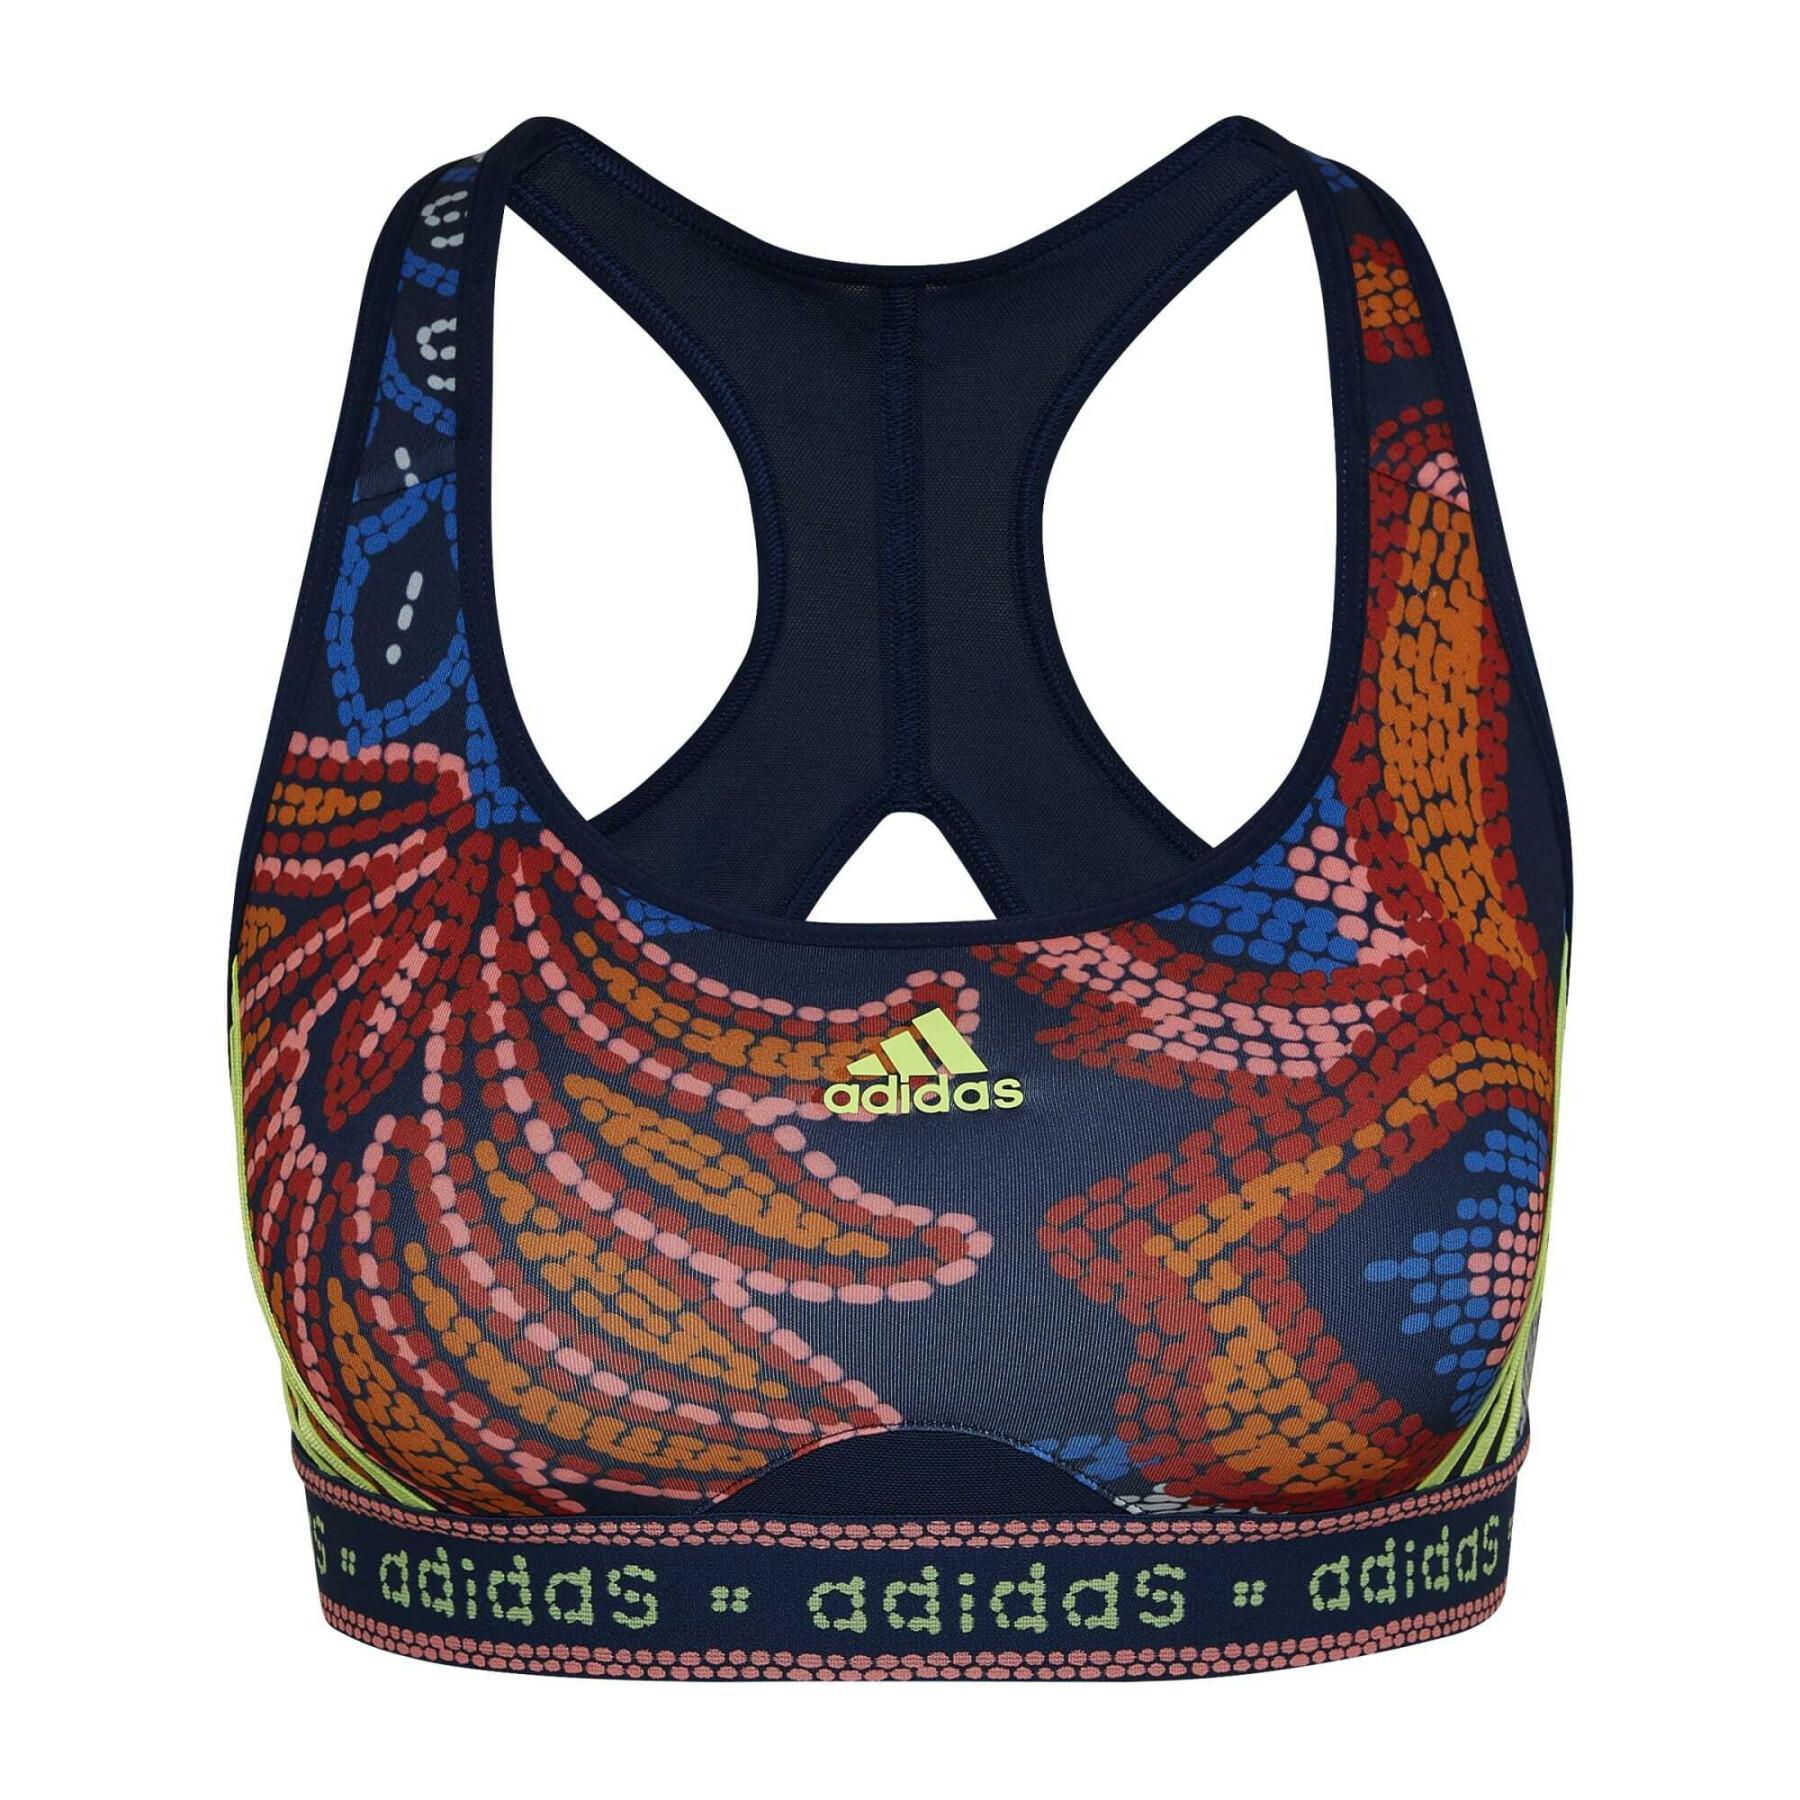 https://media.direct-running.com/catalog/product/cache/image/1800x/9df78eab33525d08d6e5fb8d27136e95/a/d/adidas_hi5215_2_apparel_photography_front_center_view_white.jpg